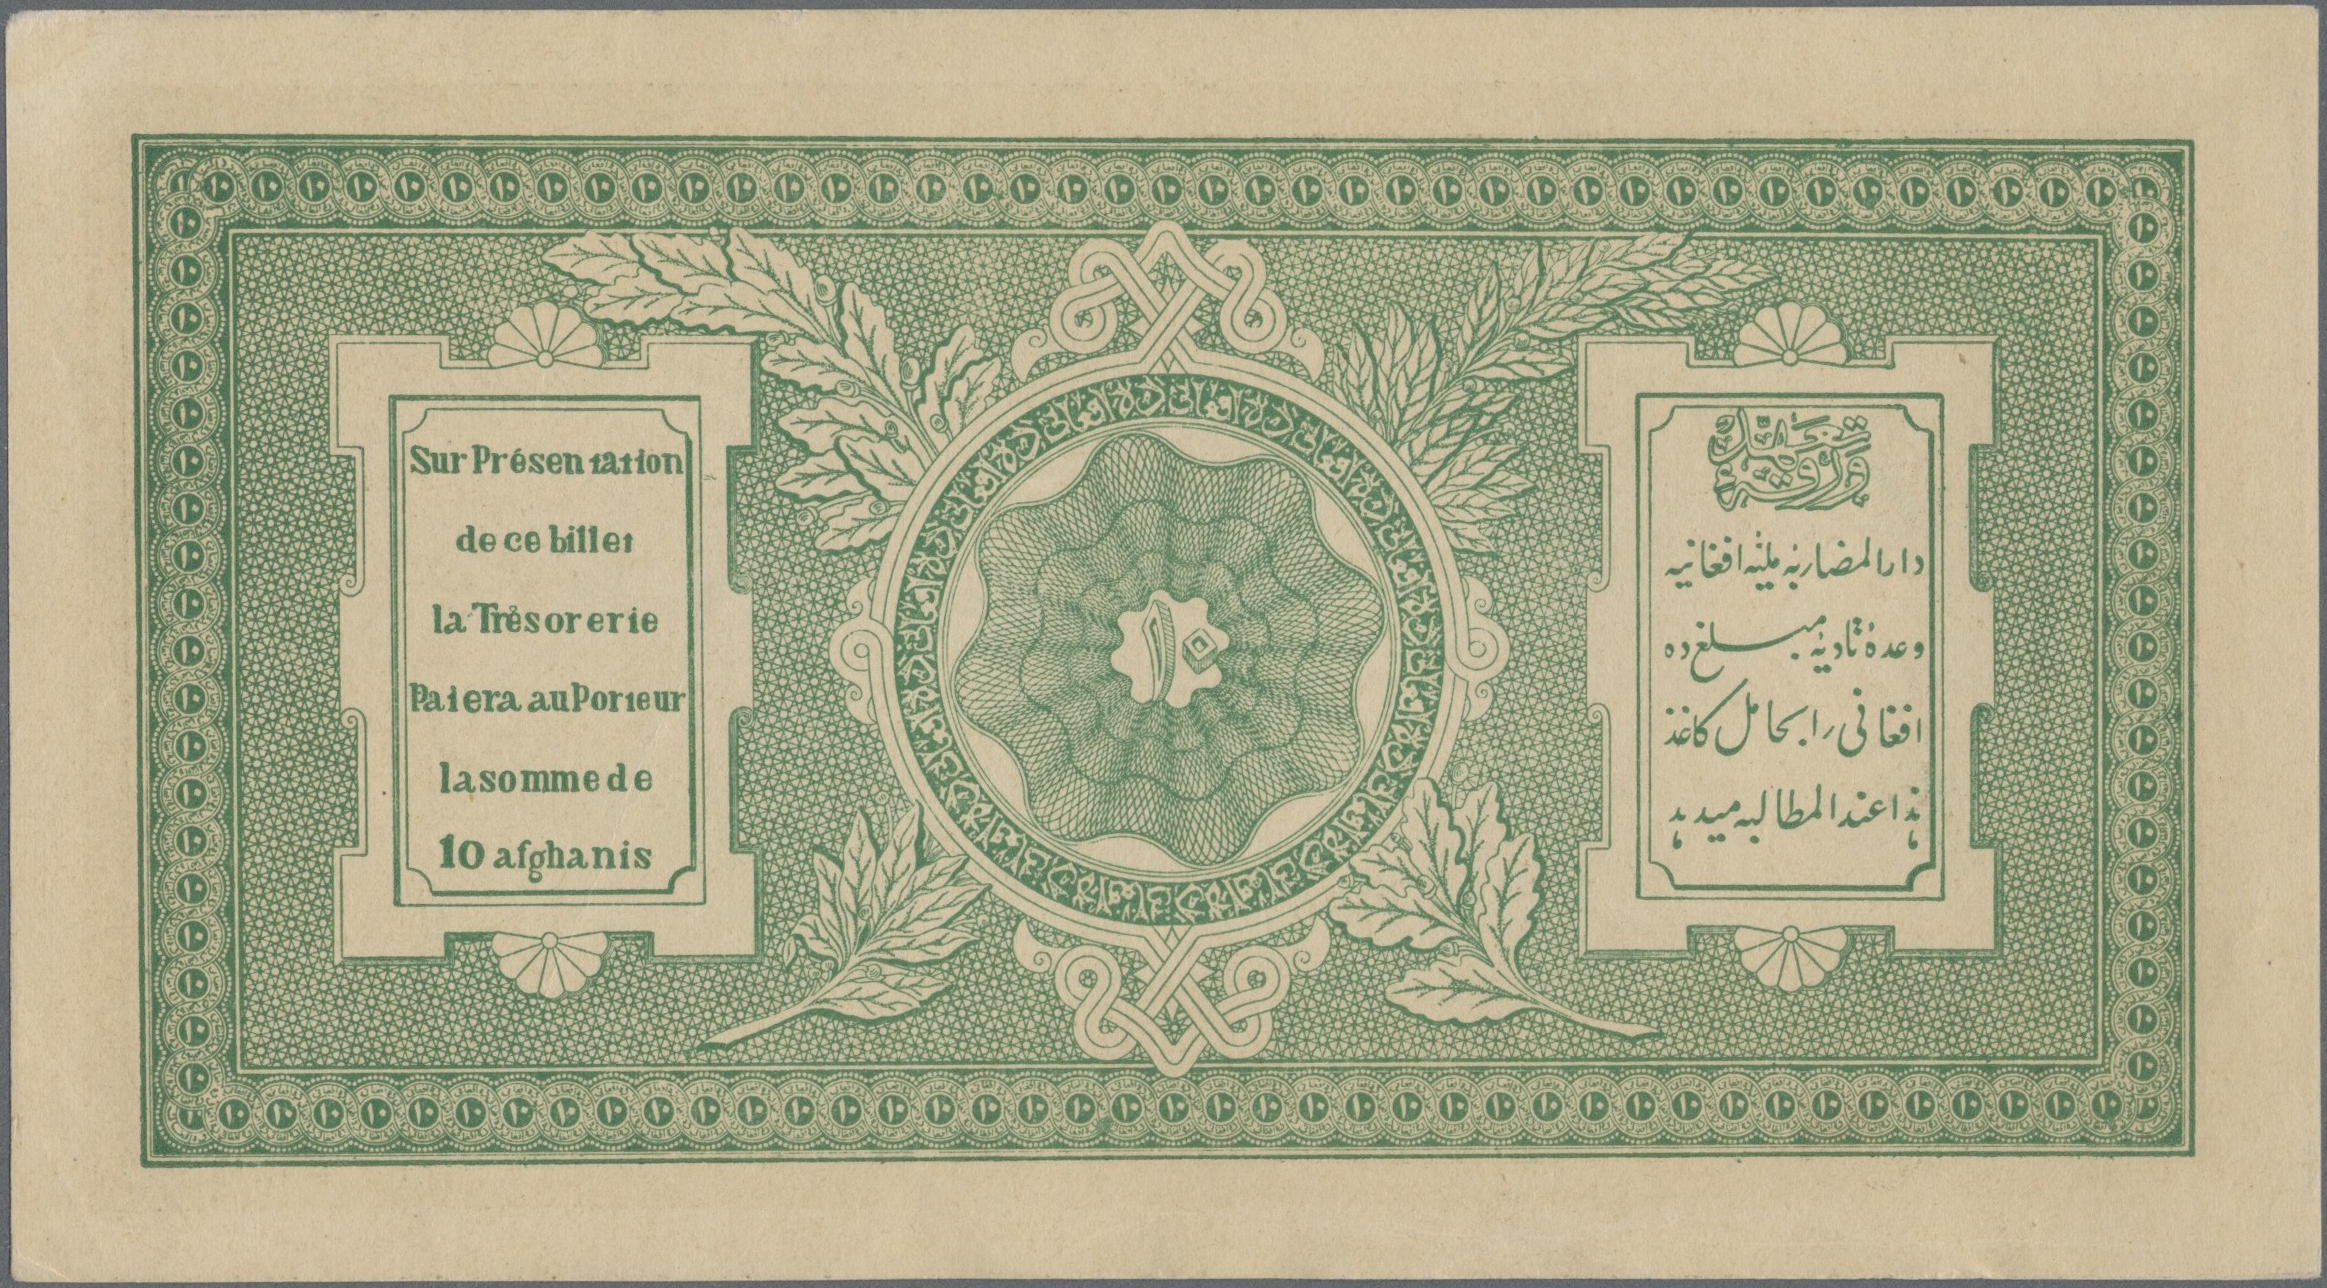 Lot 00001 - Afghanistan | Banknoten  -  Auktionshaus Christoph Gärtner GmbH & Co. KG 55th AUCTION - Day 1